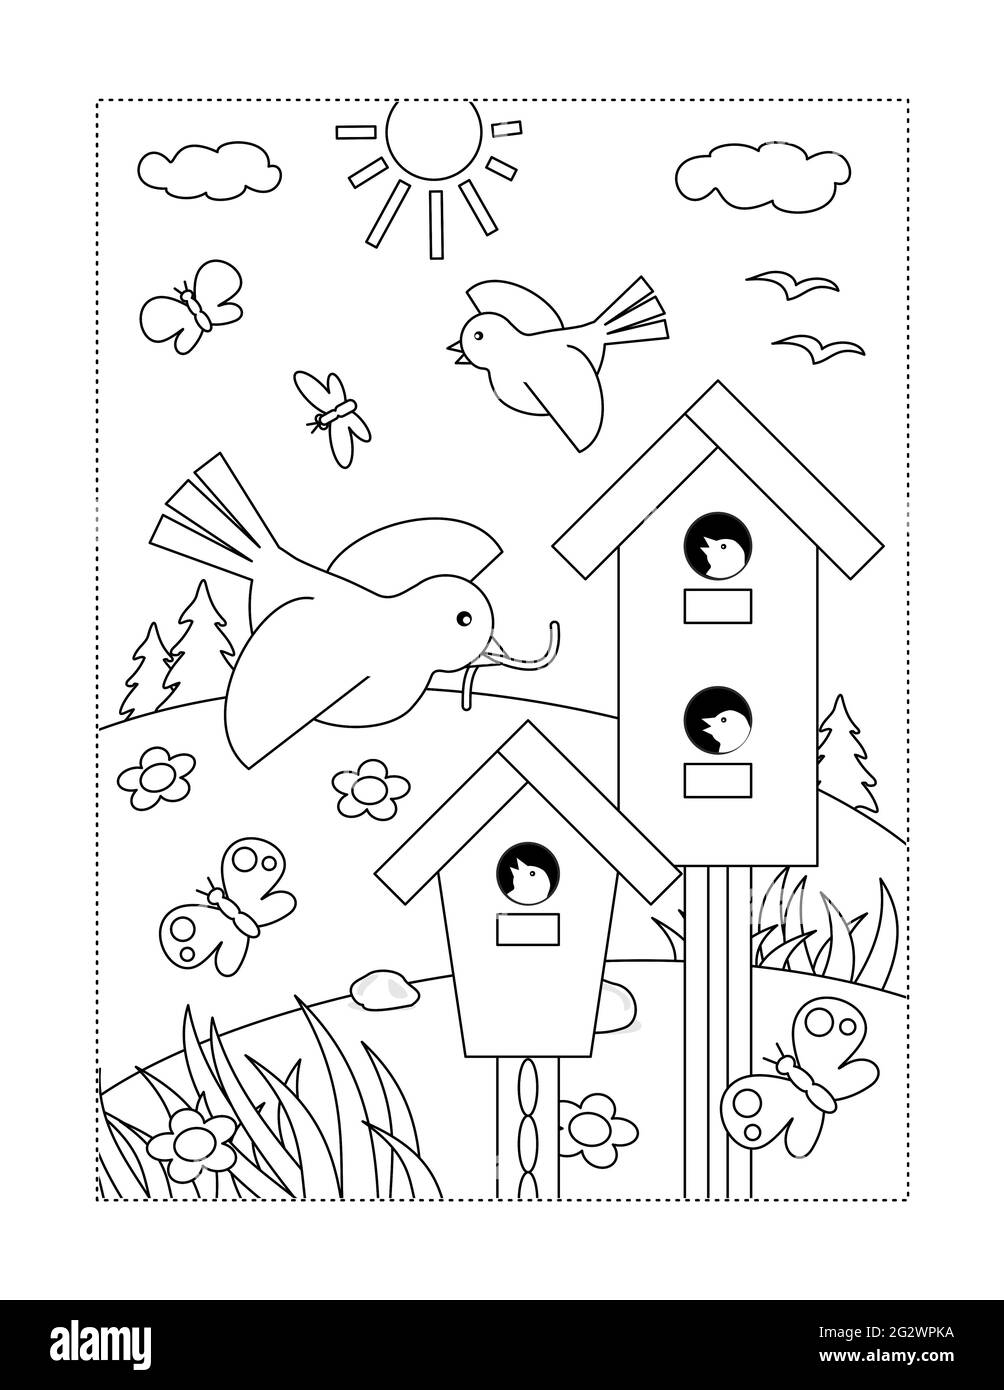 Coloring page with birds, nestlings, birdhouses Stock Photo   Alamy